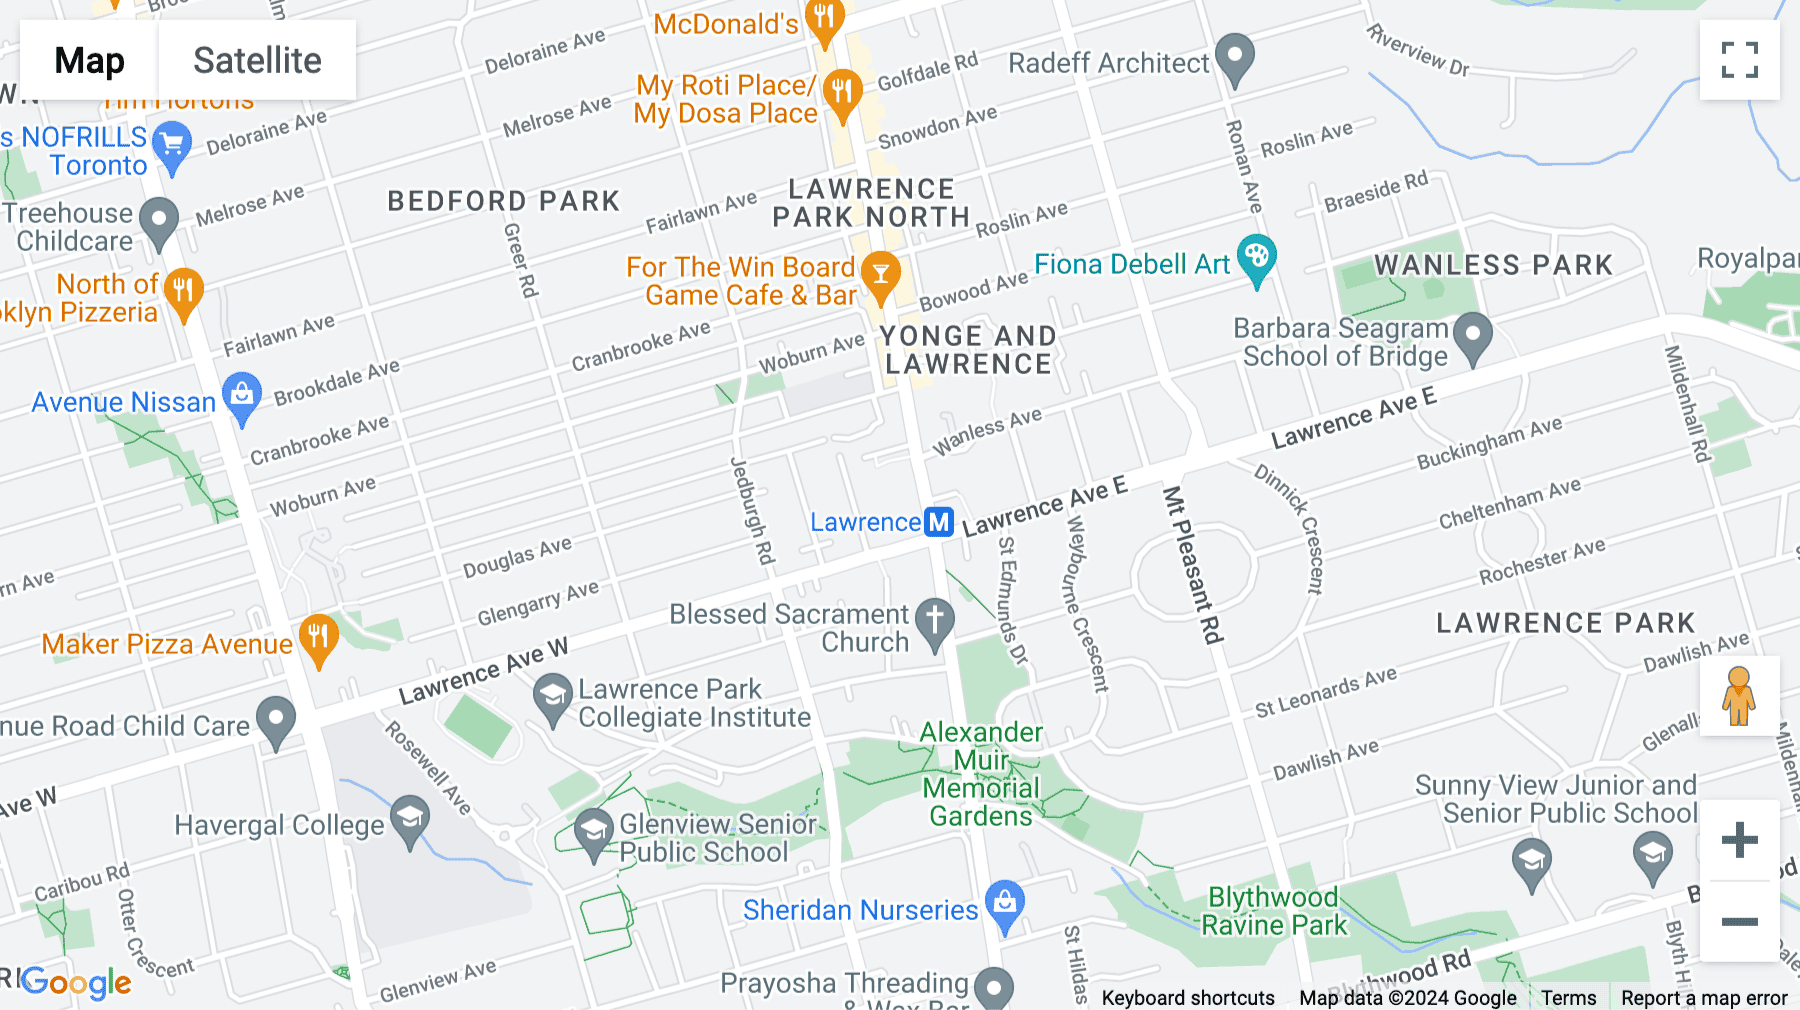 Click for interative map of 3080 Yonge Street, Suite 6060, Yonge & Lawrence business center, Toronto